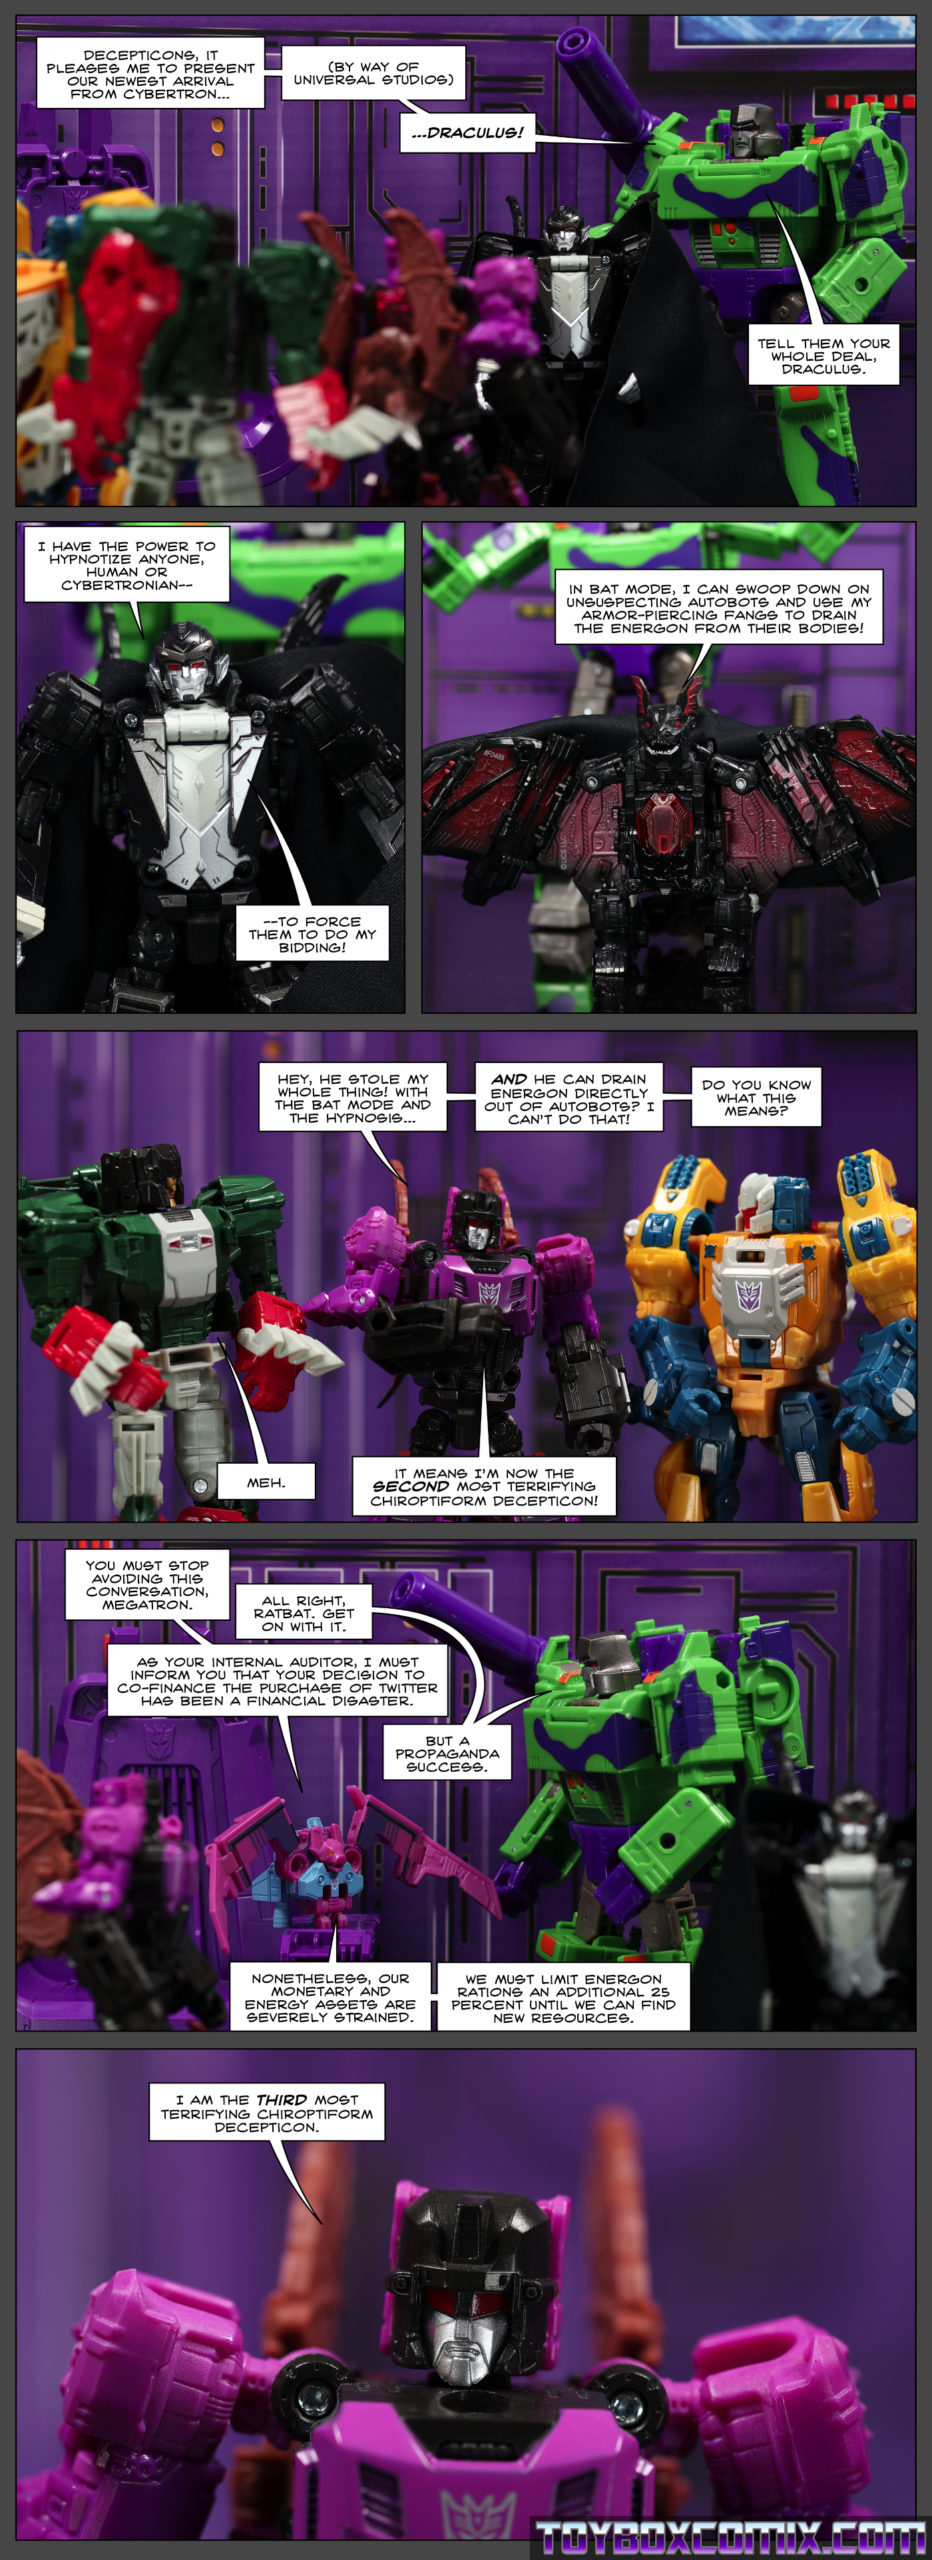 Panel 1: Megatron: “Decepticons, it pleases me to present our newest arrival from Cybertron… (by way of Universal Studios) …Draculus! Tell them your whole deal, Draculus.” 2: Draculus: “I have the power to hypnotize anyone, human or Cybertronian—to force them to do my bidding!” 3: Draculus, now in bat mode: “In bat mode, I can swoop down on unsuspecting Autobots and use my armor-piercing fangs to drain the energon from their bodies!” 4: Mindwipe to Skullcruncher and Weirdwolf: “Hey, he stole my whole thing! With the bat mode and the hypnosis…and he can drain energon directly out of Autobots? I can’t do that! Do you know what this means?” Skullcruncher: “Meh.” Mindwipe: “It means I’m now the second most terrifying chiroptiform Decepticon!” 5: As Mindwipe looks on and Draculus walks away, Ratbat talks to Megatron: “You must stop avoiding this conversation, Megatron.” Megatron: “All right, Ratbat. Get on with it.” Ratbat: “As your internal auditor, I must inform you that your decision to co-finance the purchase of Twitter has been a financial disaster.” Megatron: “But a propaganda success.” Ratbat: “Nonetheless, our monetary and energy assets are severely strained. We must limit energon rations an additional 25 percent until we can find new resources.” 6: Mindwipe: “I am the third most terrifying chiroptiform Decepticon.”